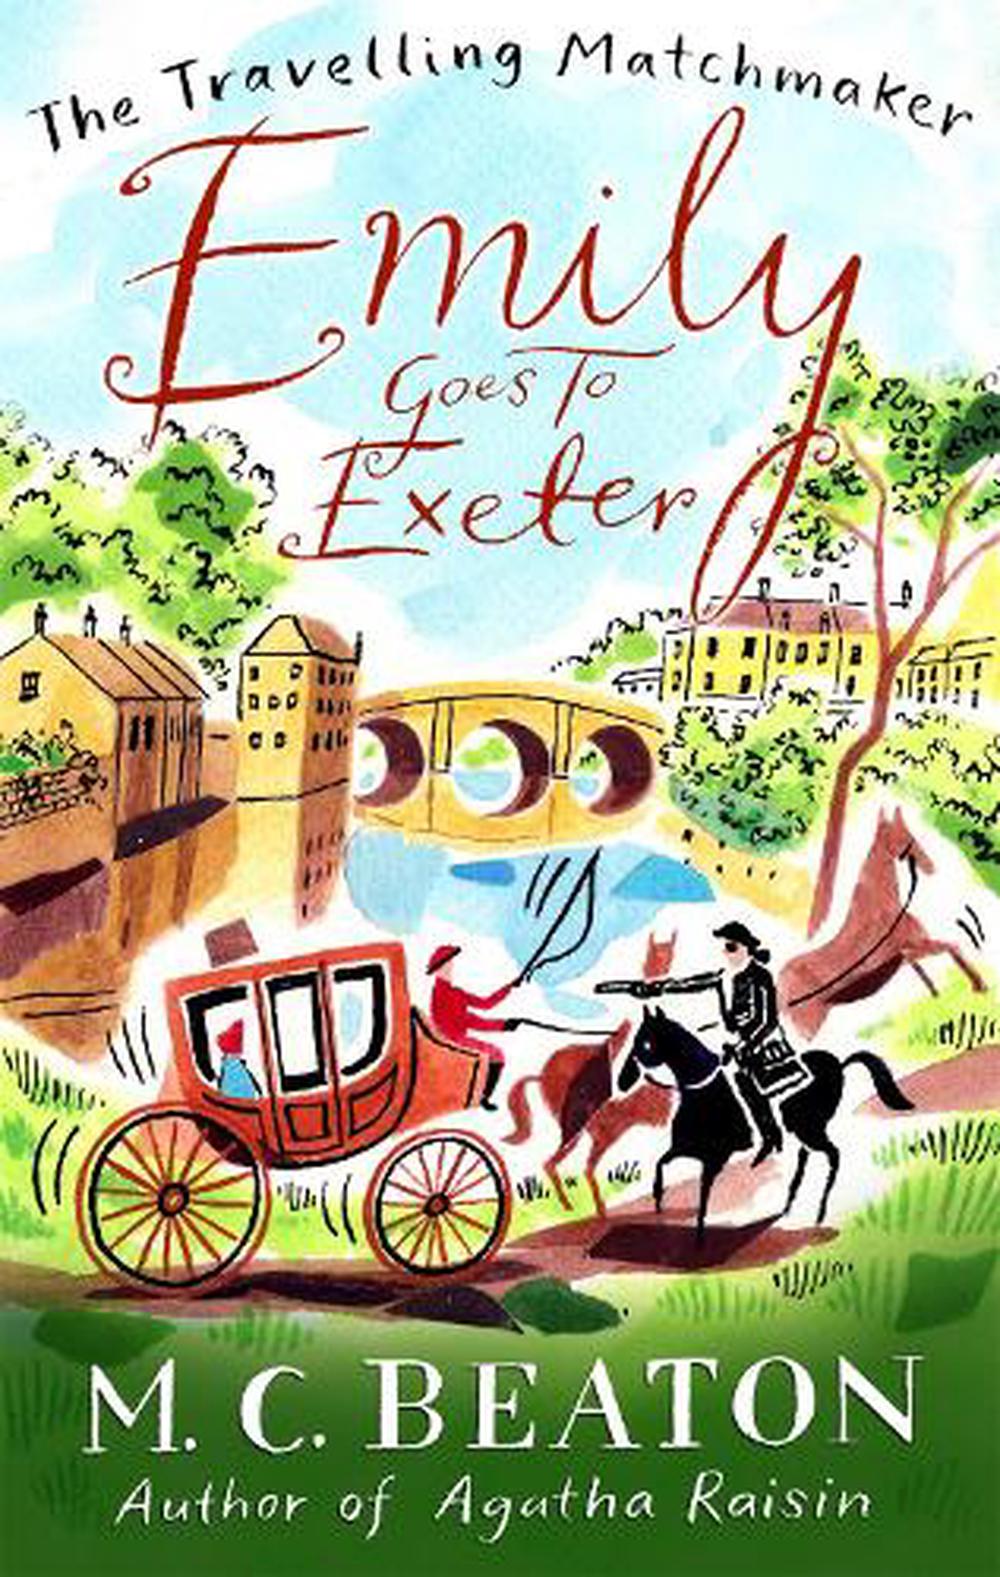 Emily Goes to Exeter by M.C. Beaton (English) Paperback